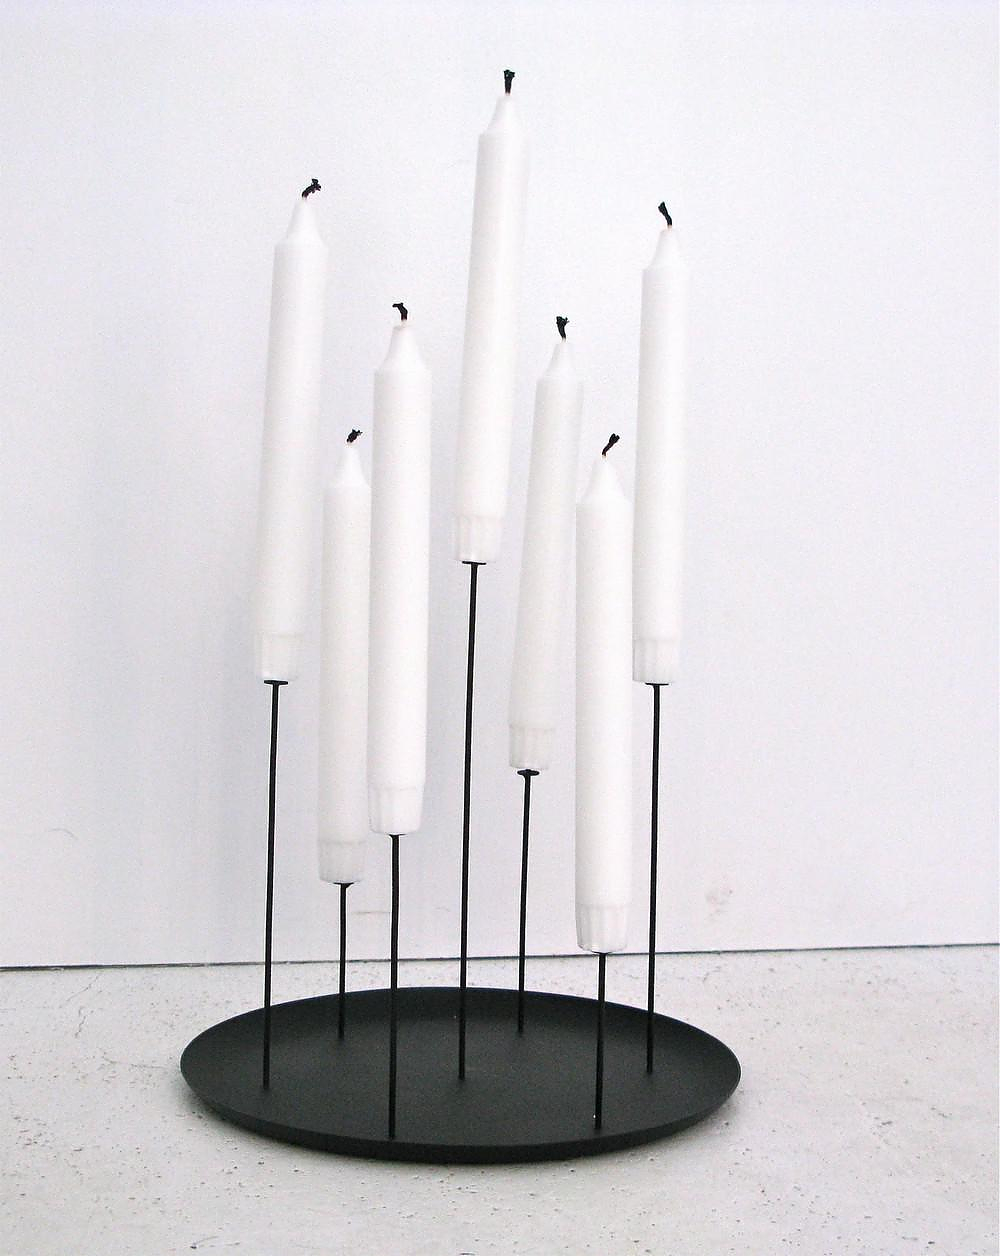 Multi Candle Pin Candelambra, a pedestal for candles by ENO STUDIO.